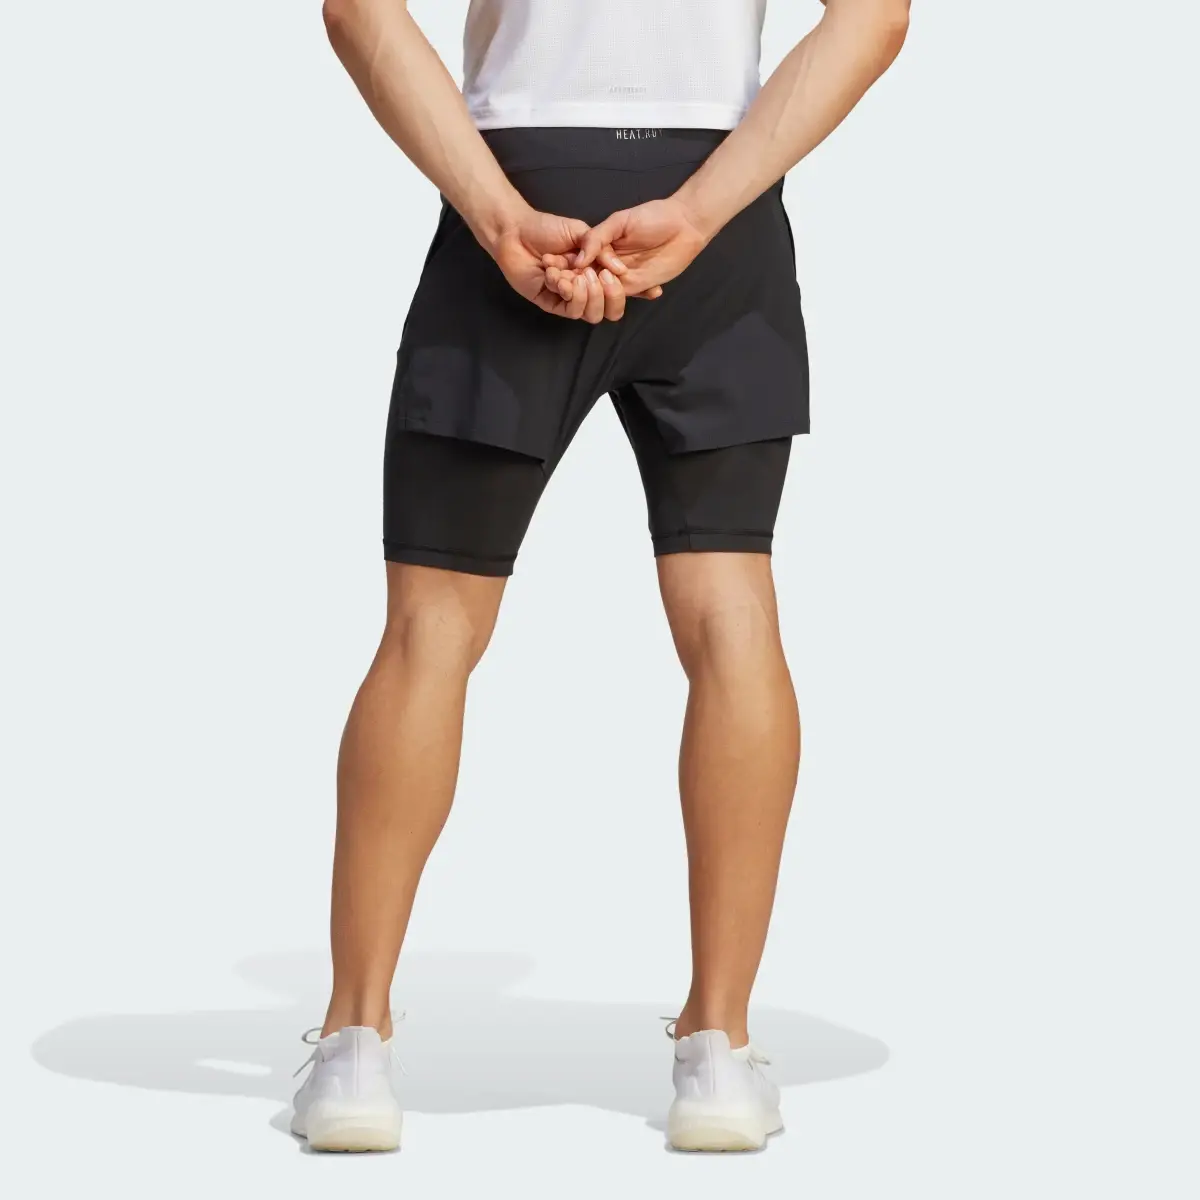 Adidas HEAT.RDY HIIT Elevated Training 2-in-1 Shorts. 2